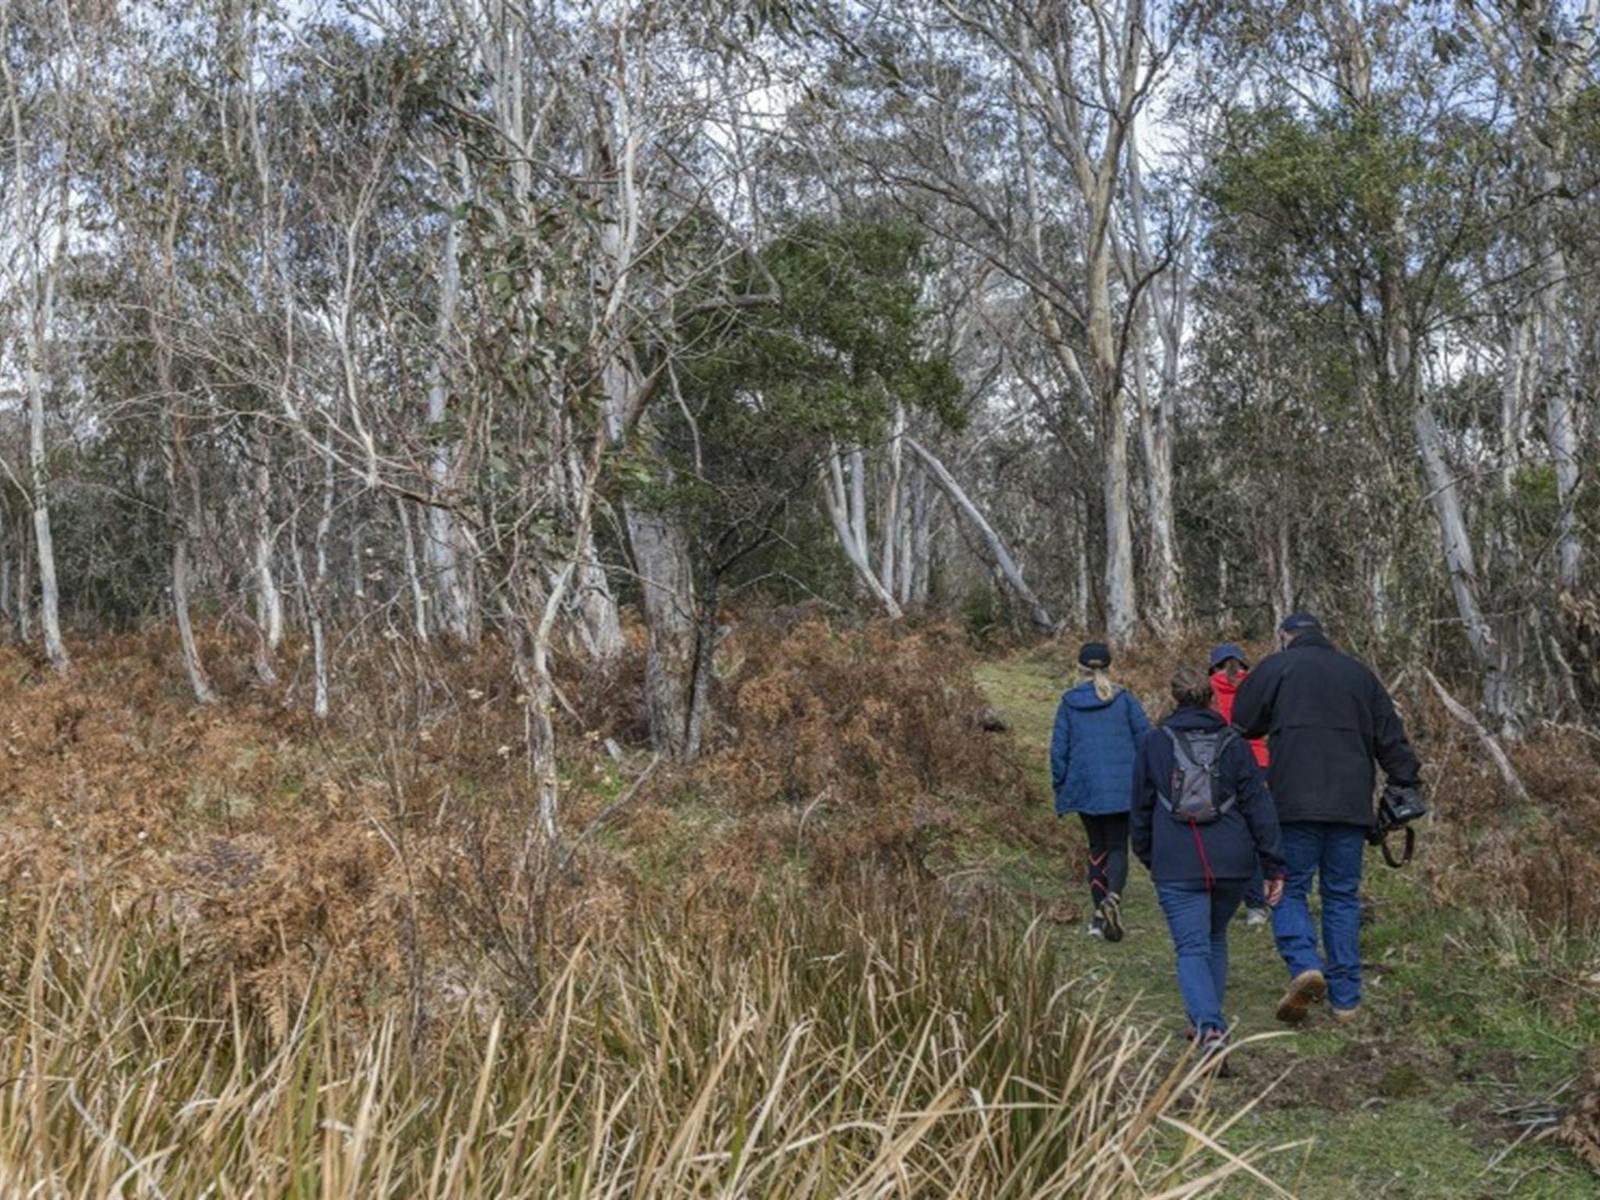 A group of friends walking along Platypus Pool walking track in Werrikimbe National Park. Photo: